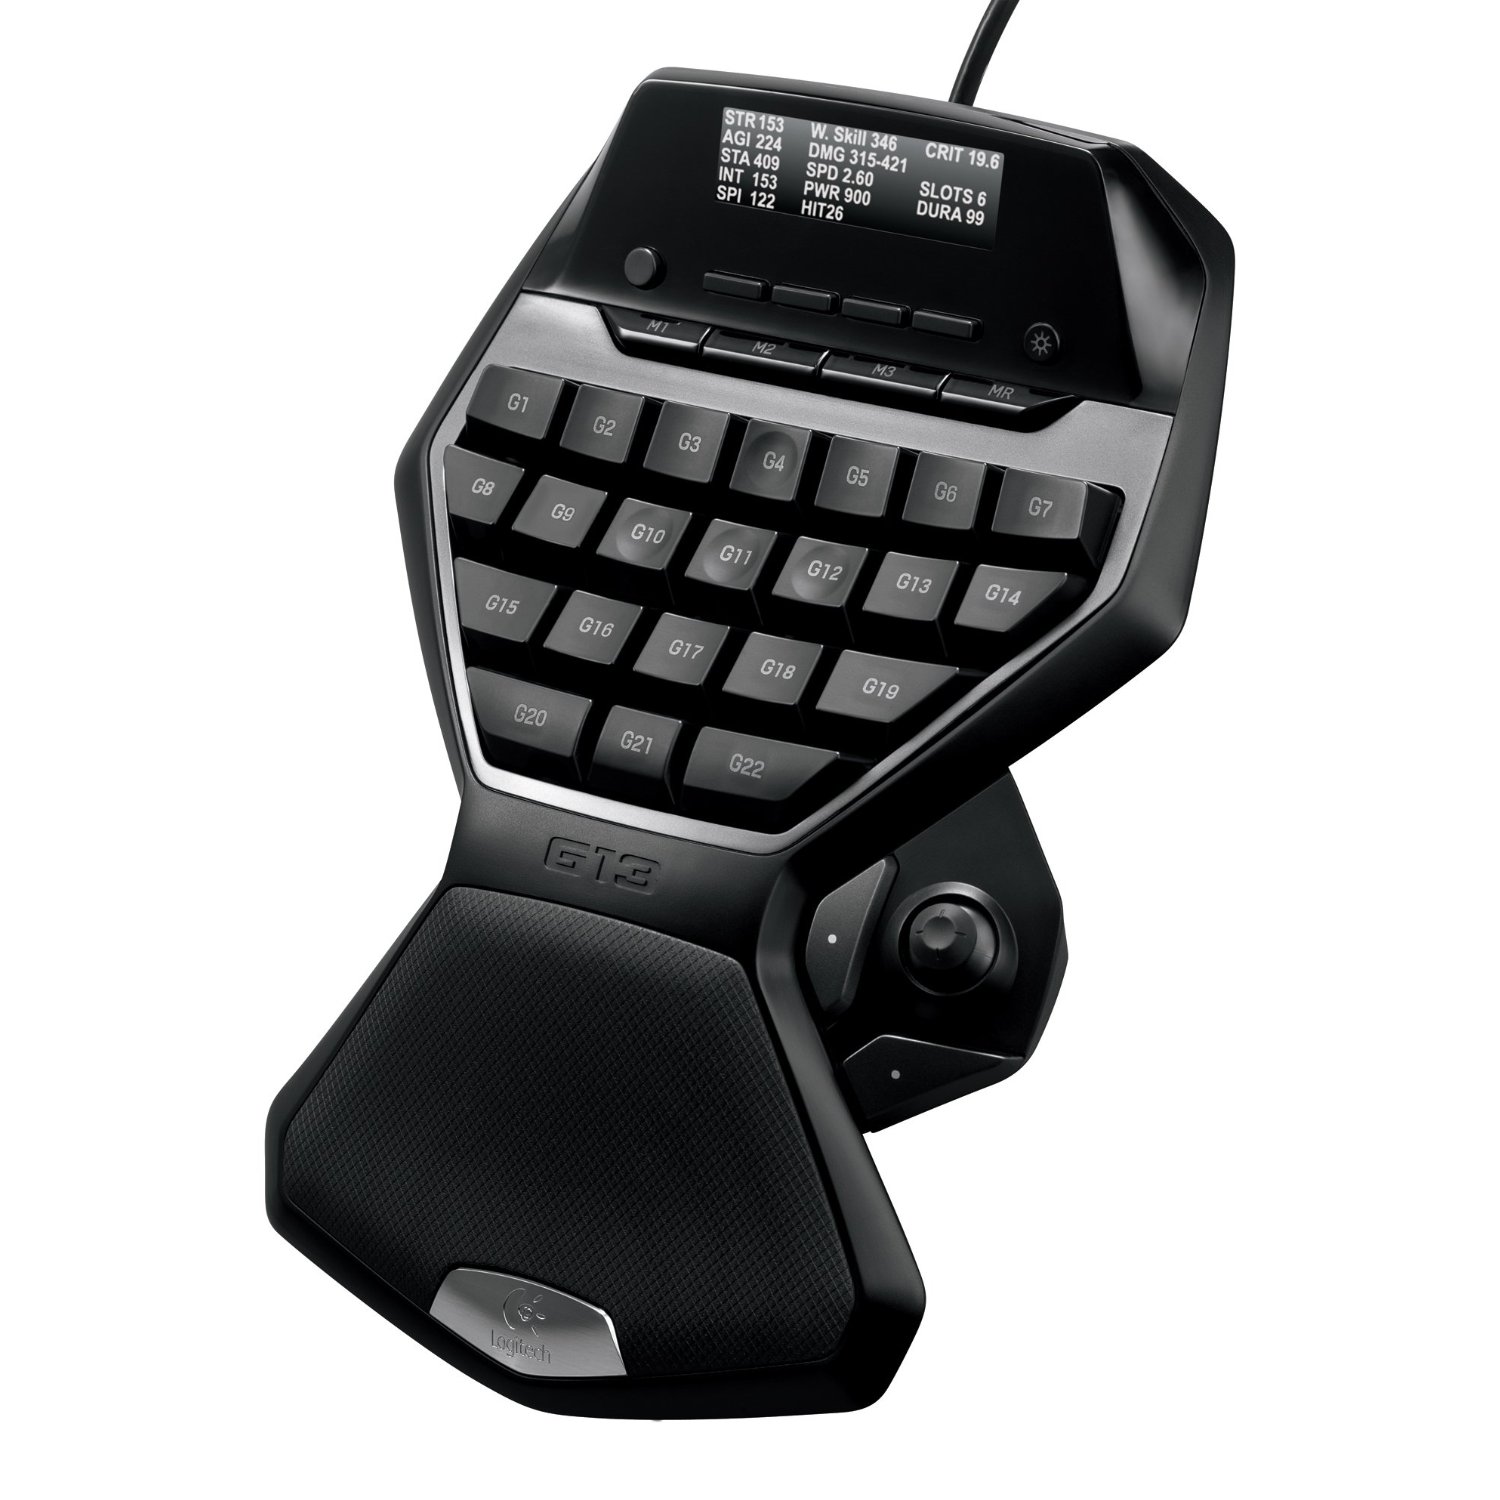 http://thetechjournal.com/wp-content/uploads/images/1108/1312882591-logitech-g13-programmable-gameboard-with-lcd-display-1.jpg